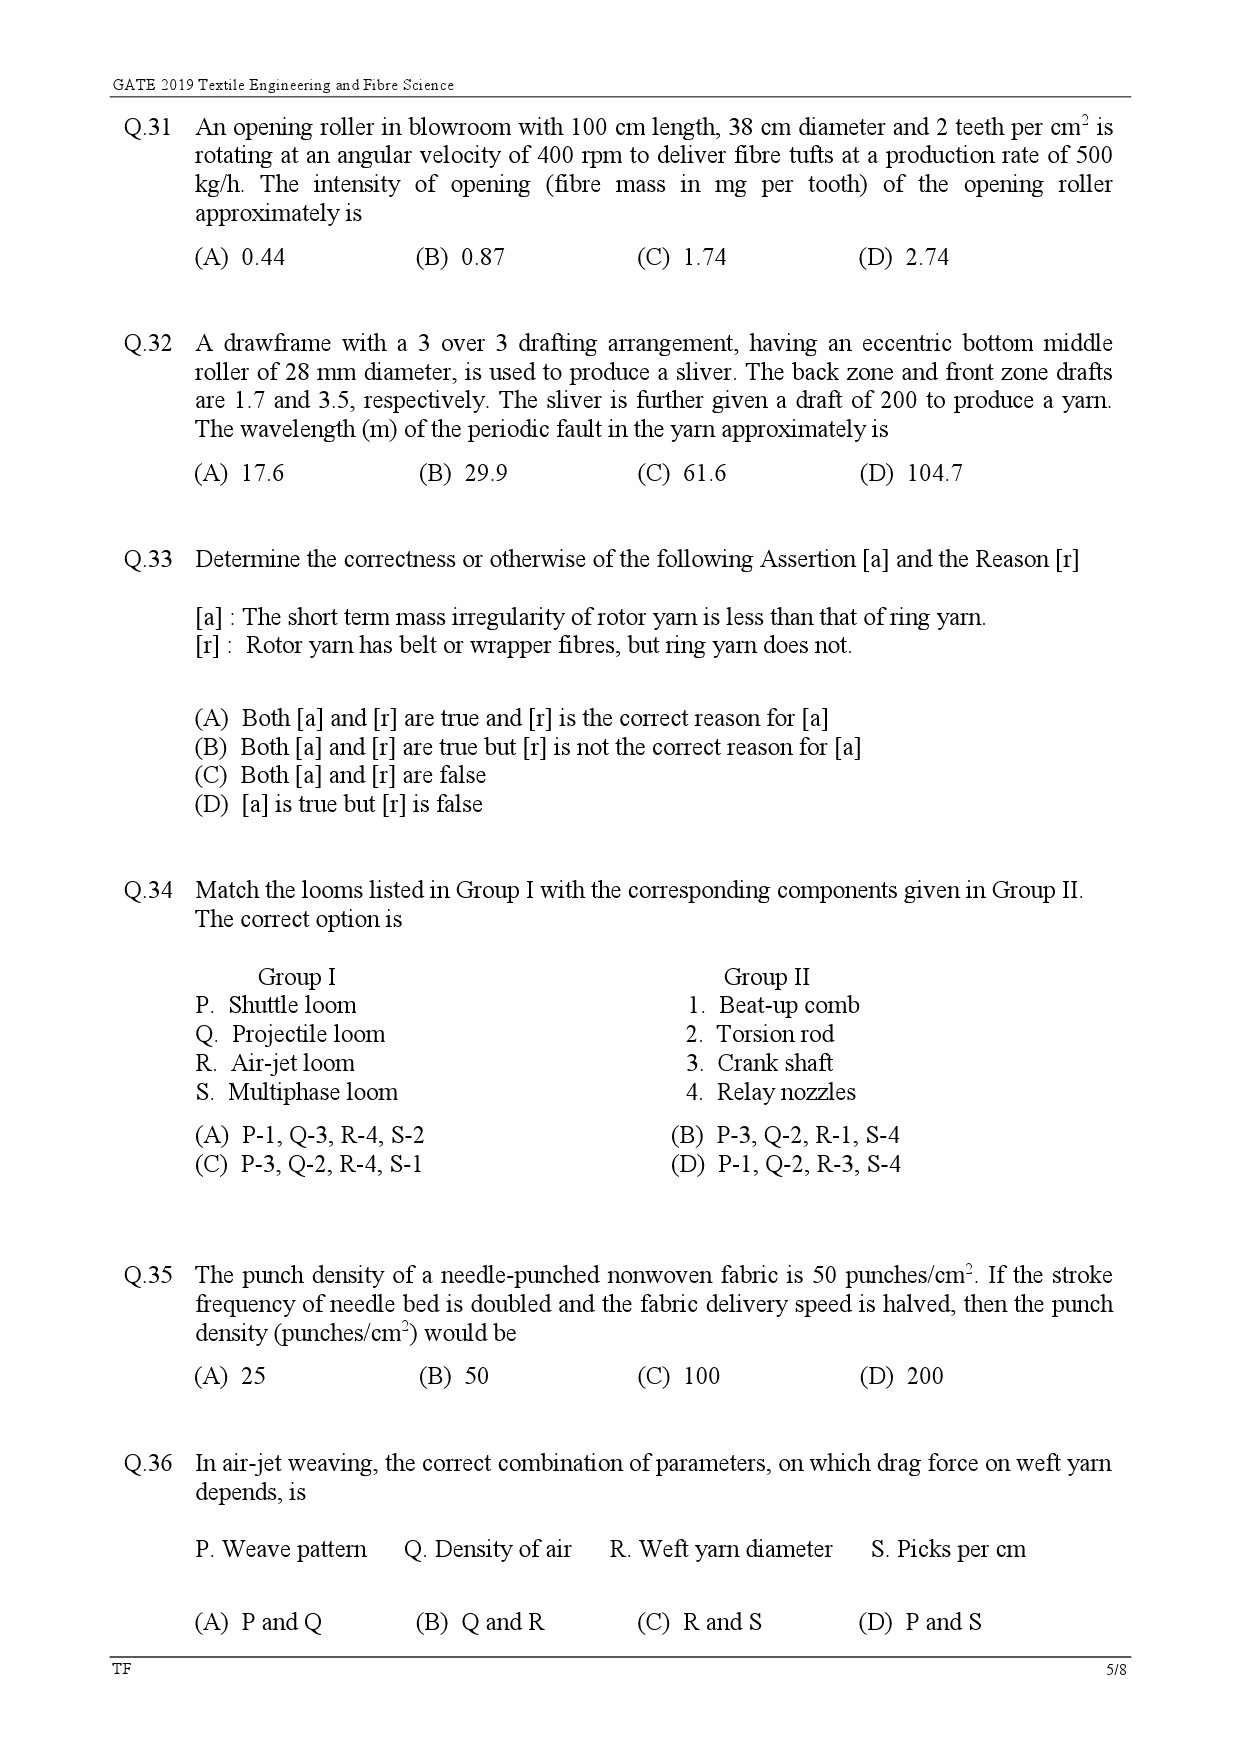 GATE Exam Question Paper 2019 Textile Engineering and Fibre Science 8